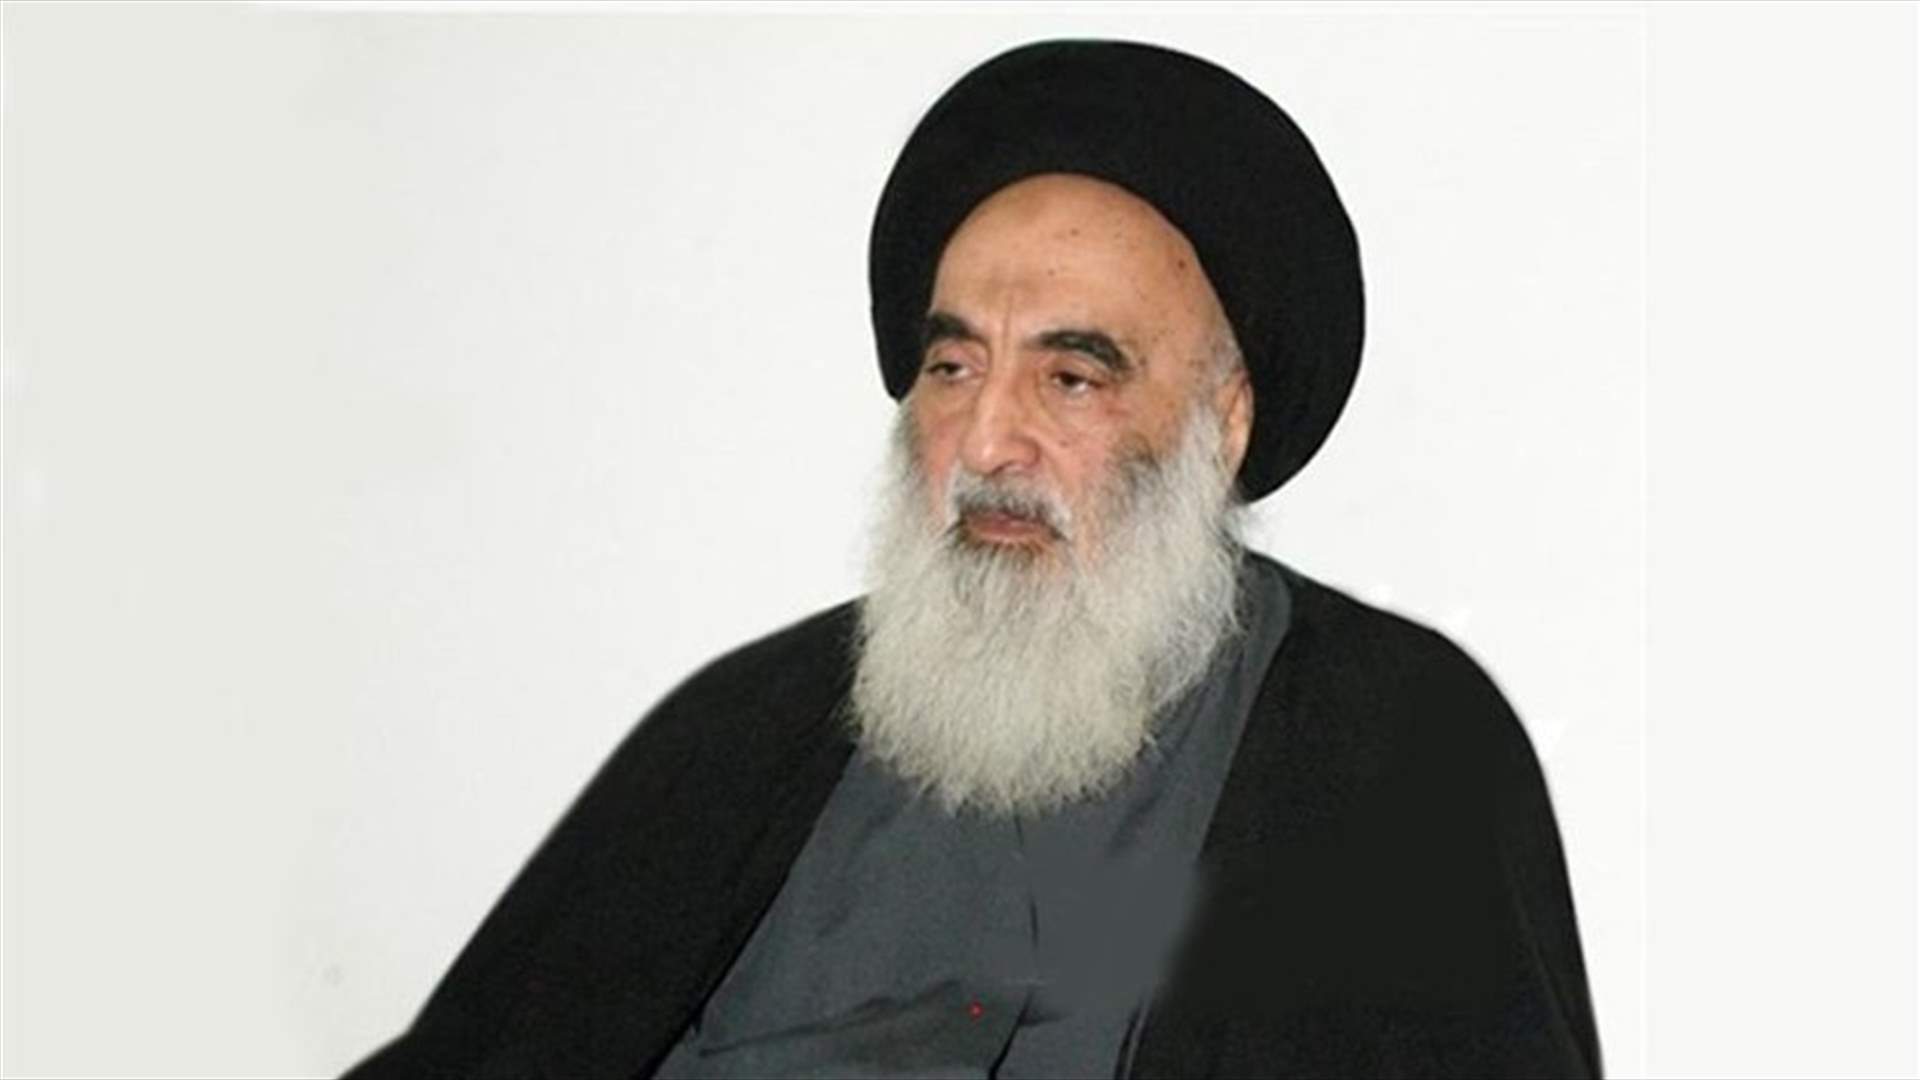 Iraq&#39;s top Shi&#39;ite cleric condemns protester killings and calls for gun controls